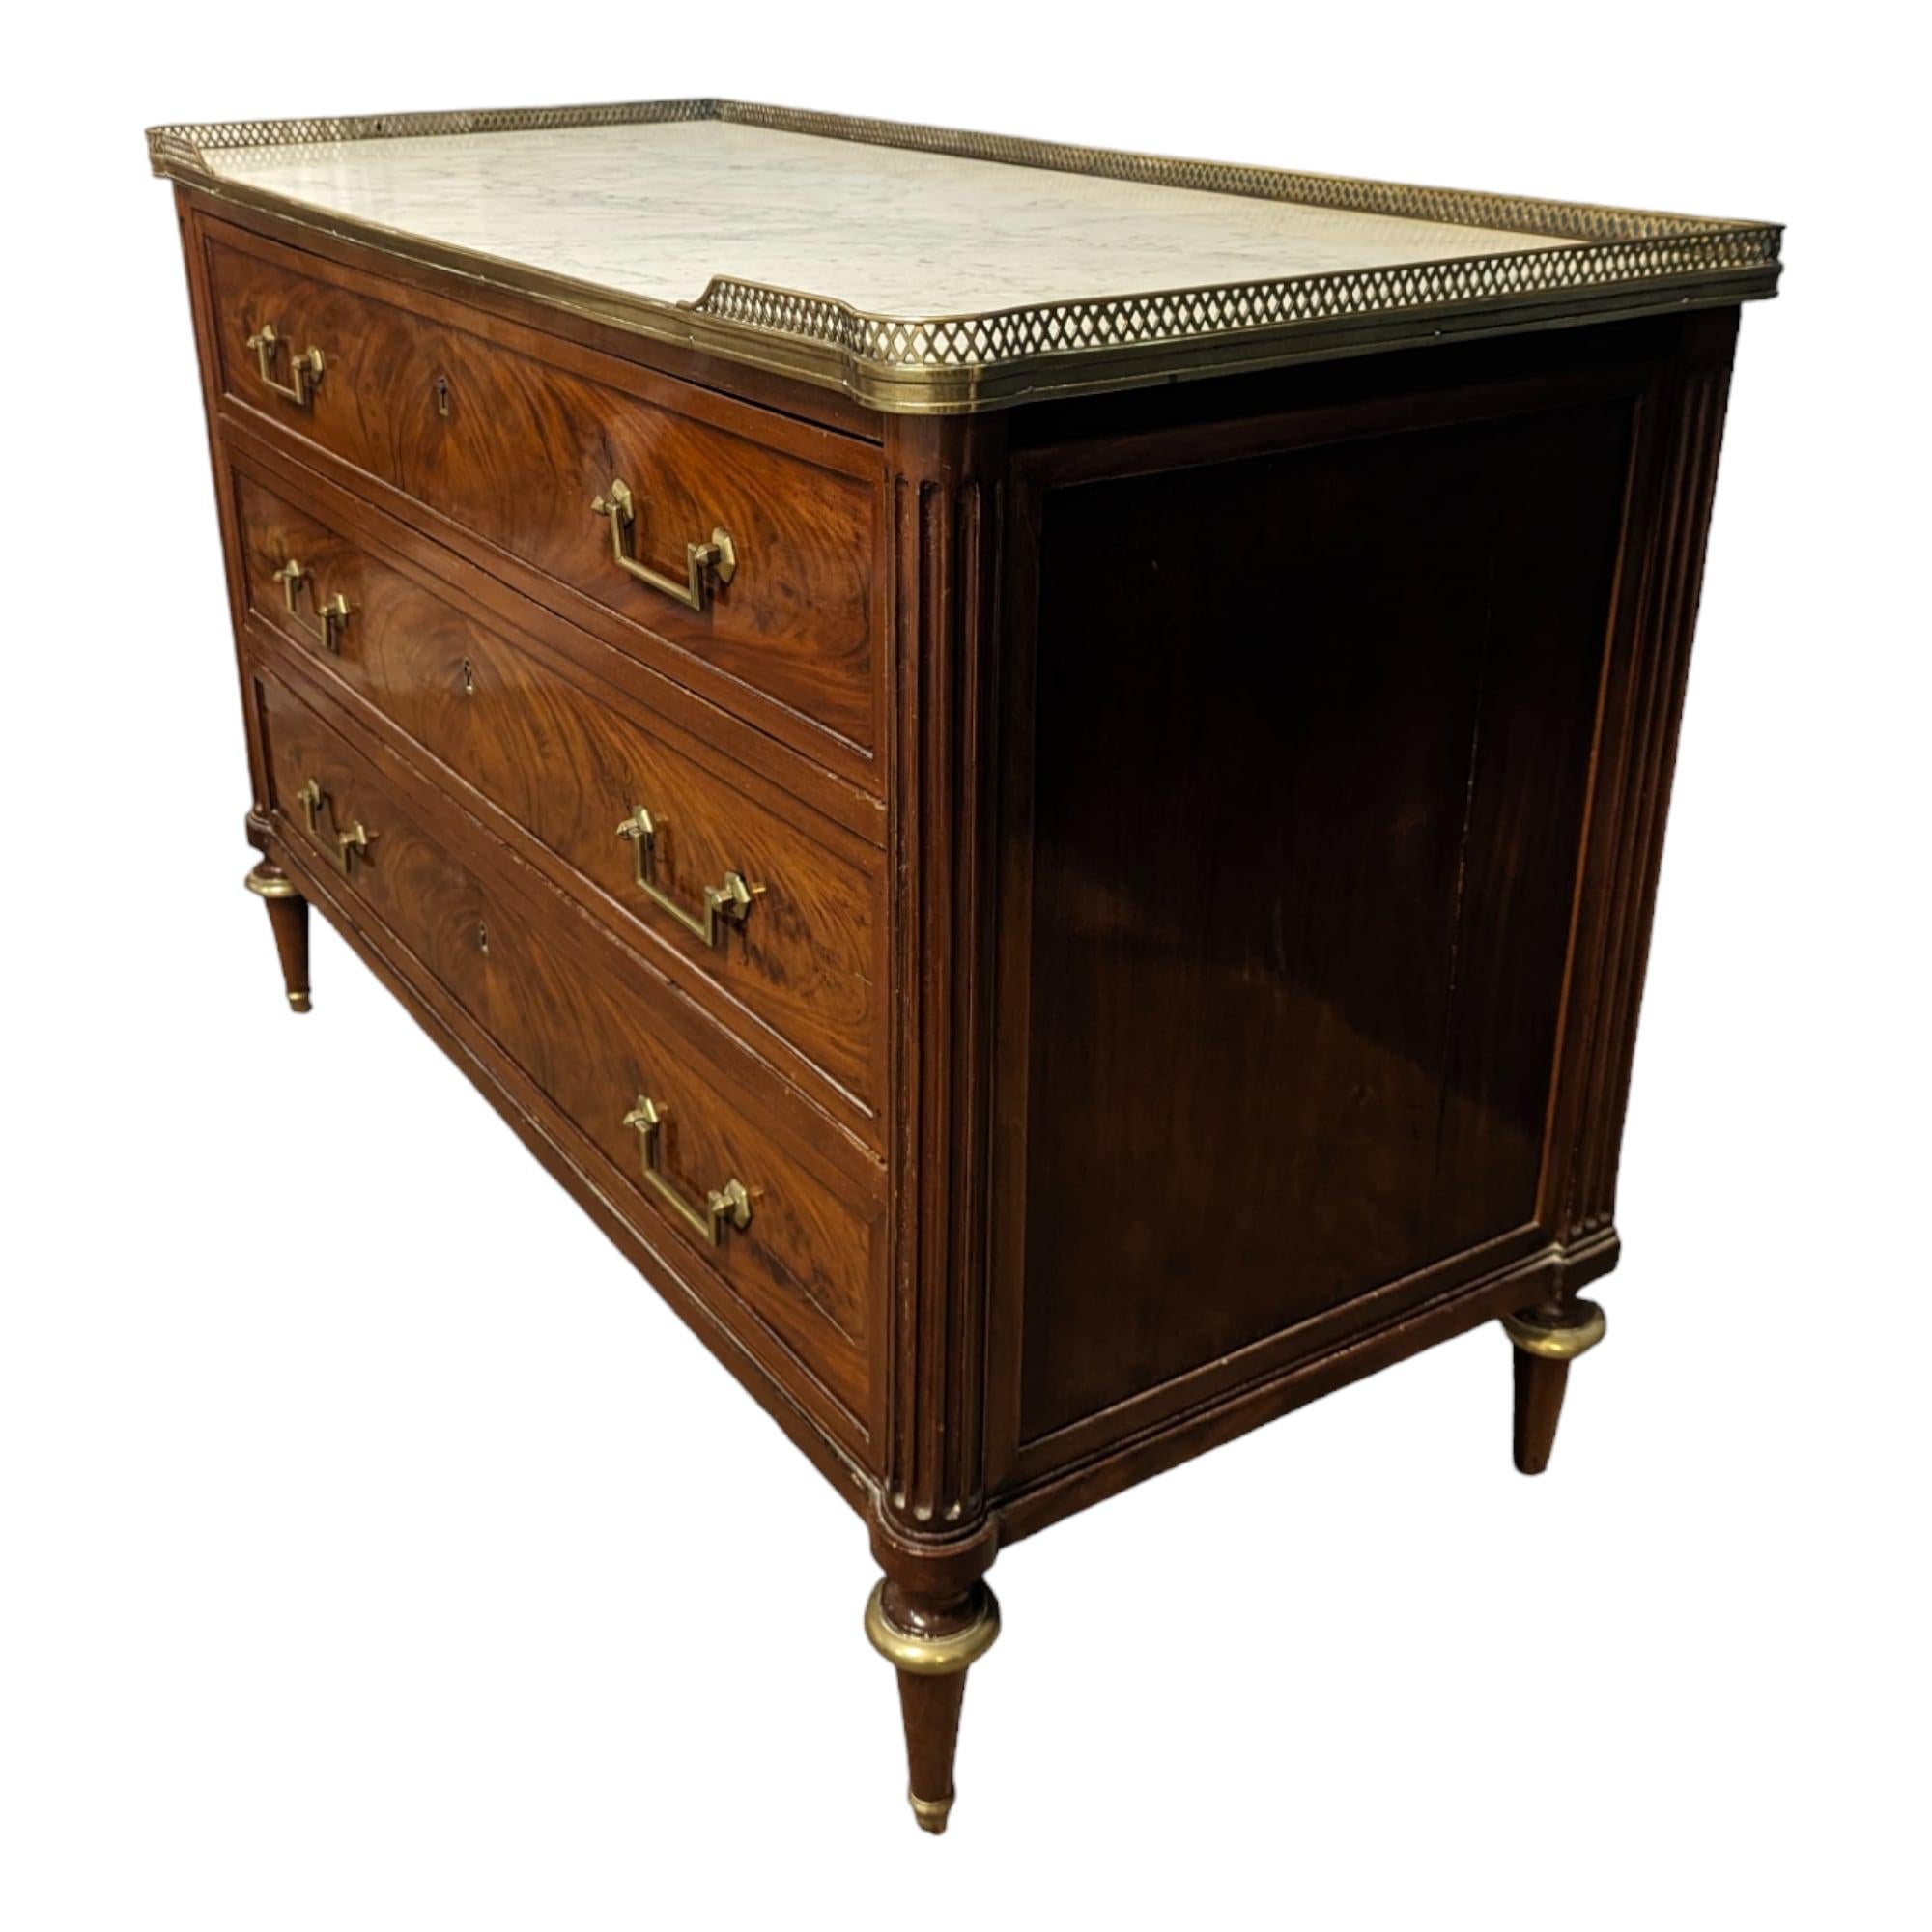 Coming from France. Immerse yourself in the timeless elegance of Louis XVI style with this remarkable mahogany chest of drawers, a piece that evokes the refinement and sophistication of the era.

Crafted from mahogany, a precious wood often used in